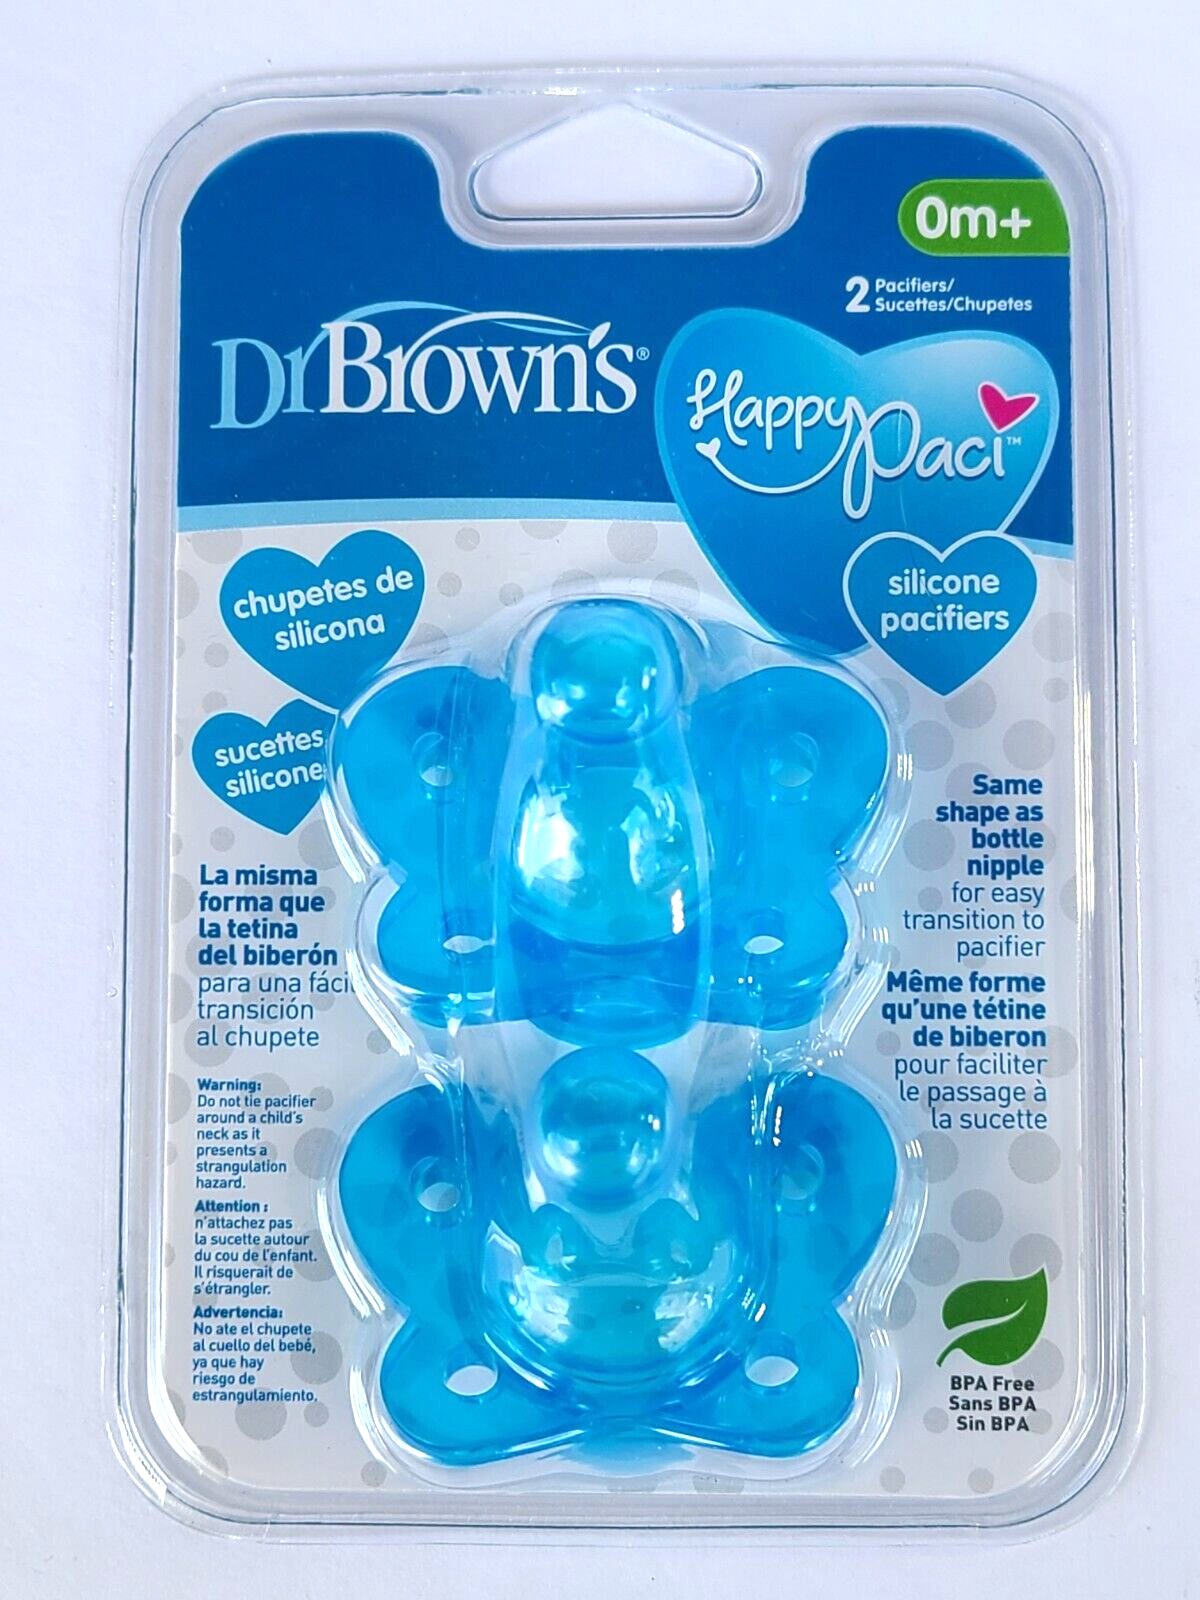 Dr Brown's Happy Paci 0m+ Silicone Baby Pacifiers New 2 Pack Blue BPA Free - $26.98